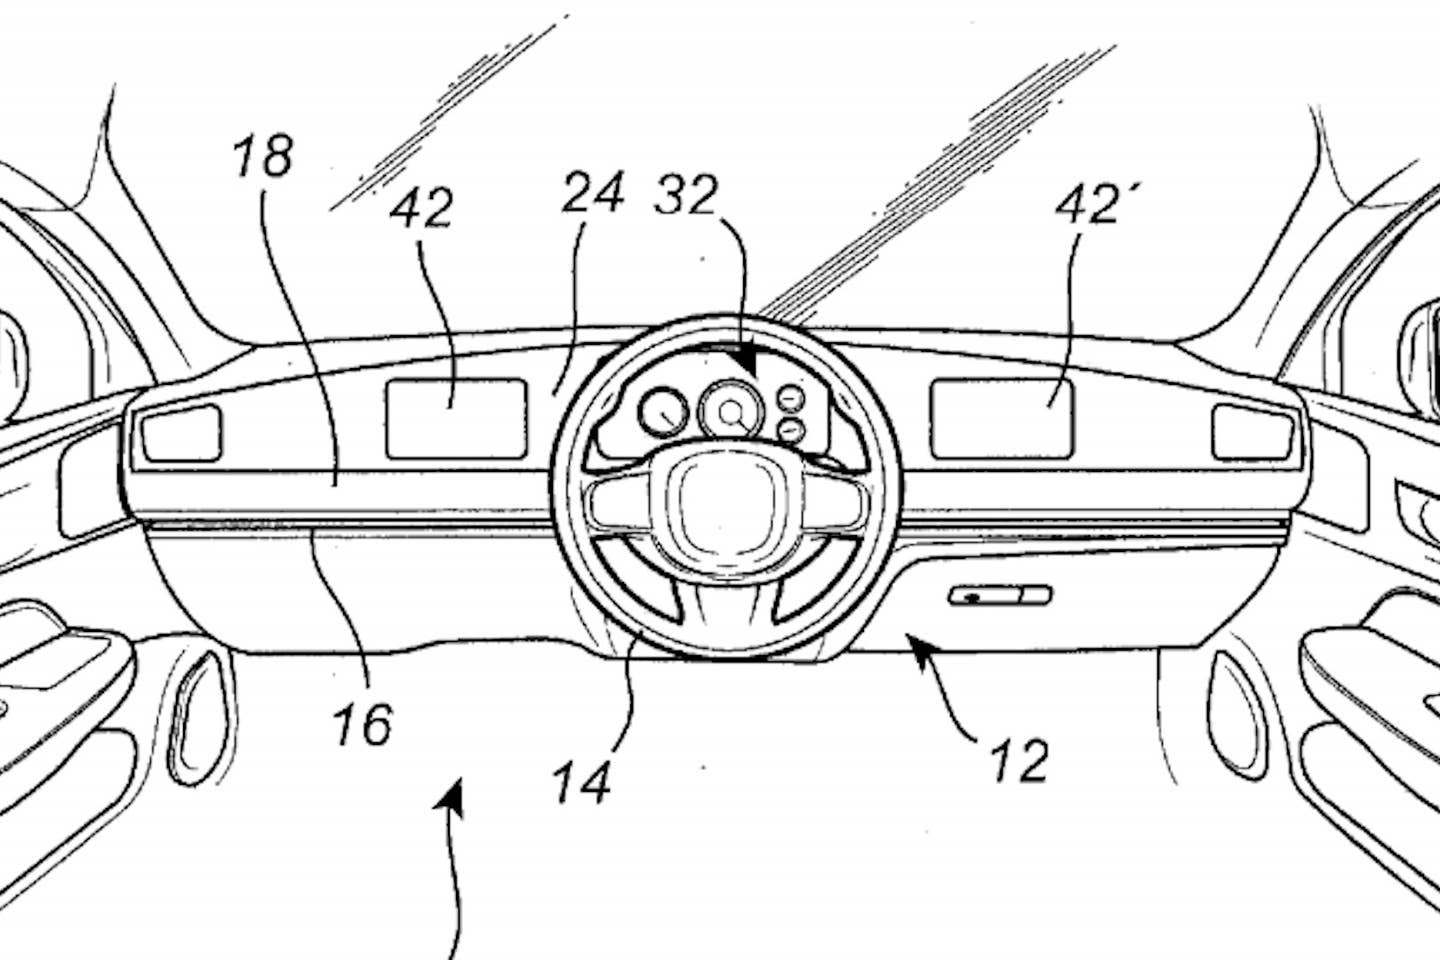 message-editor%2F1601649924948-volvo-variable-driving-position-patent-3-png.694.png